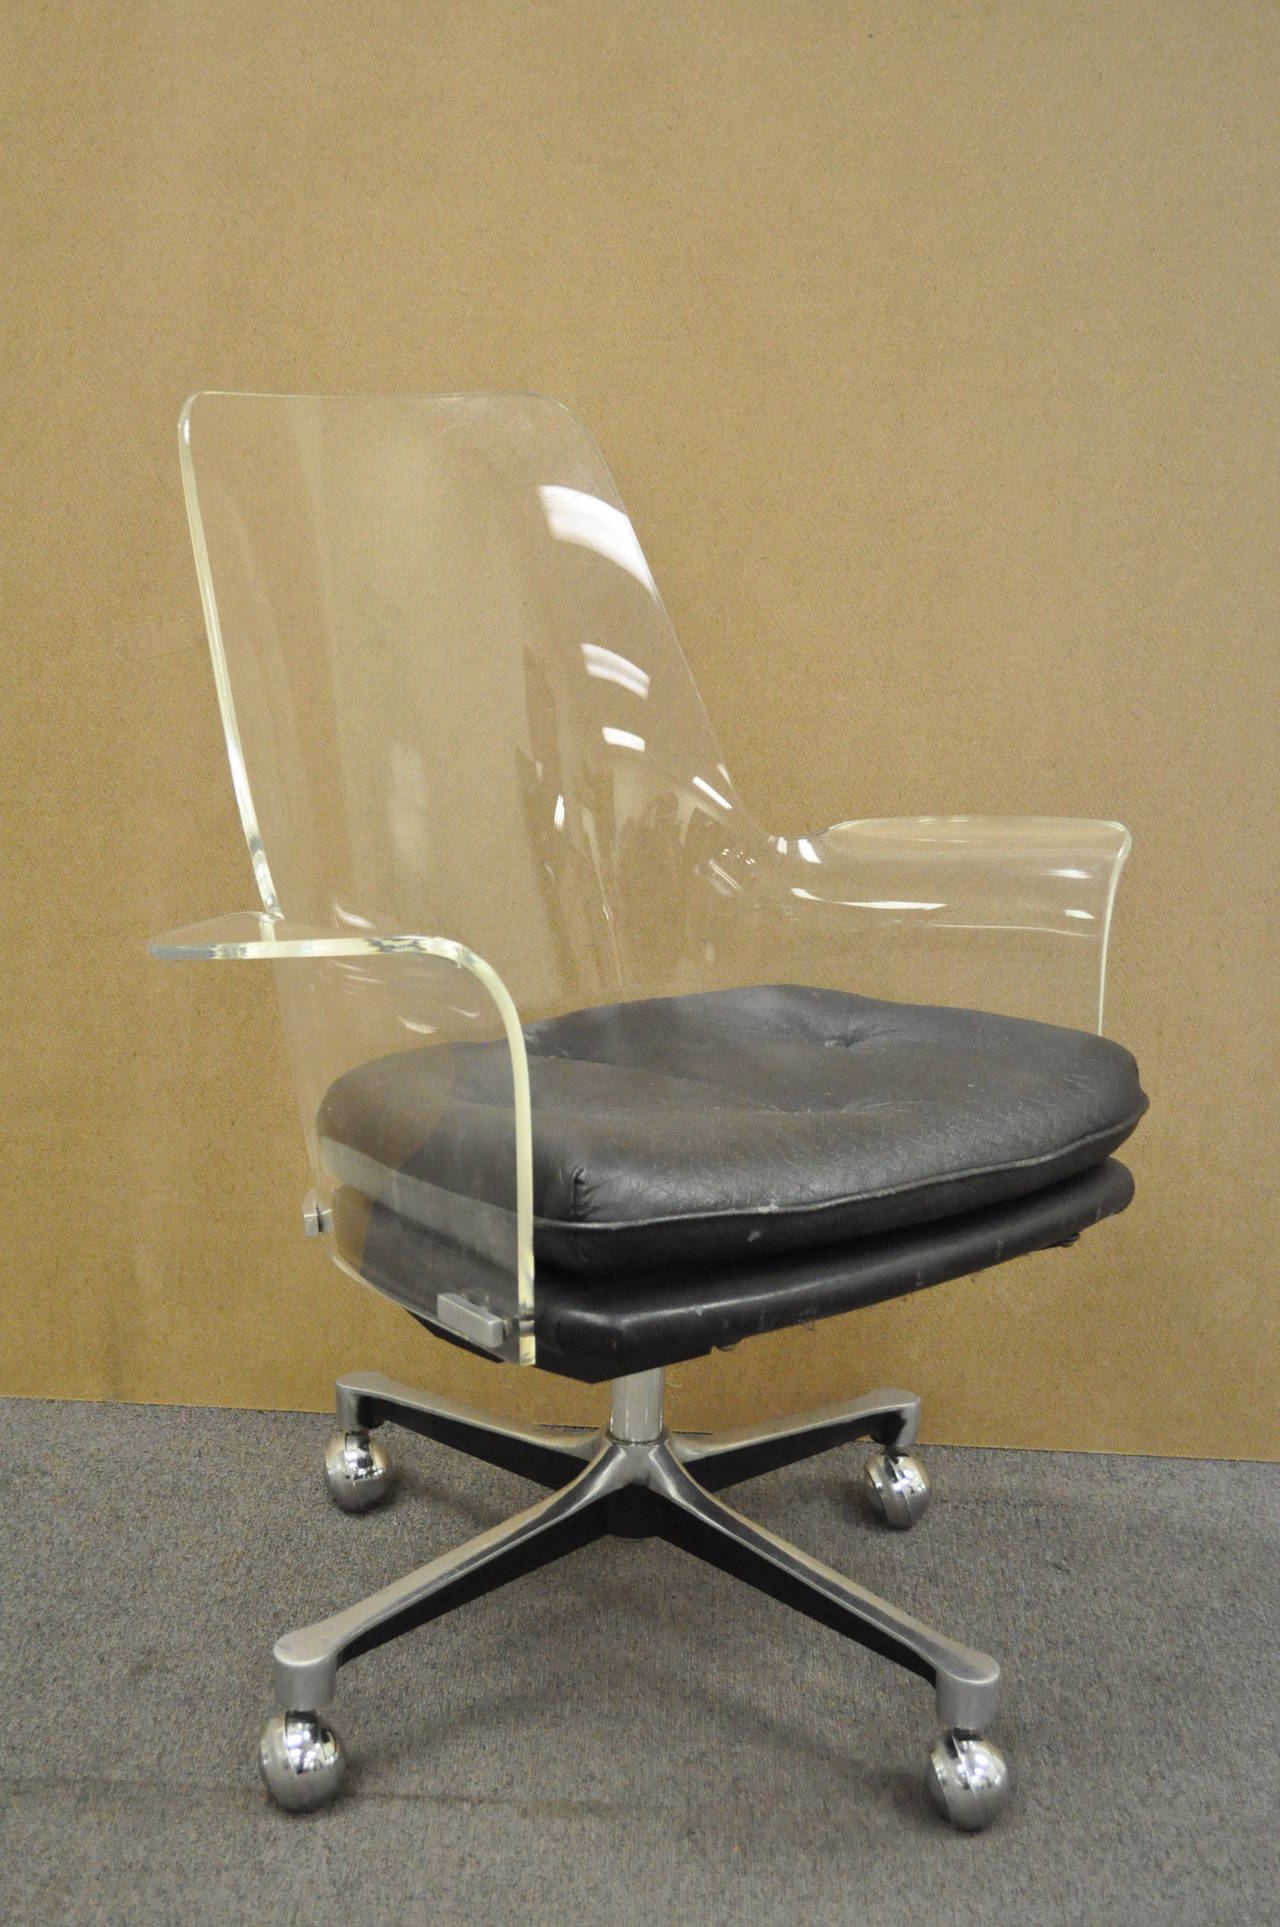 Very Cool Vintage, Mid Century Modern,  Sculpted Clear Lucite Swivel Arm Chair. The chair features a thick bent lucite seat and back with flared arms, and aluminum swag base. Very similar to pieces designed by Erwine & Estelle Laverne and Vladimir